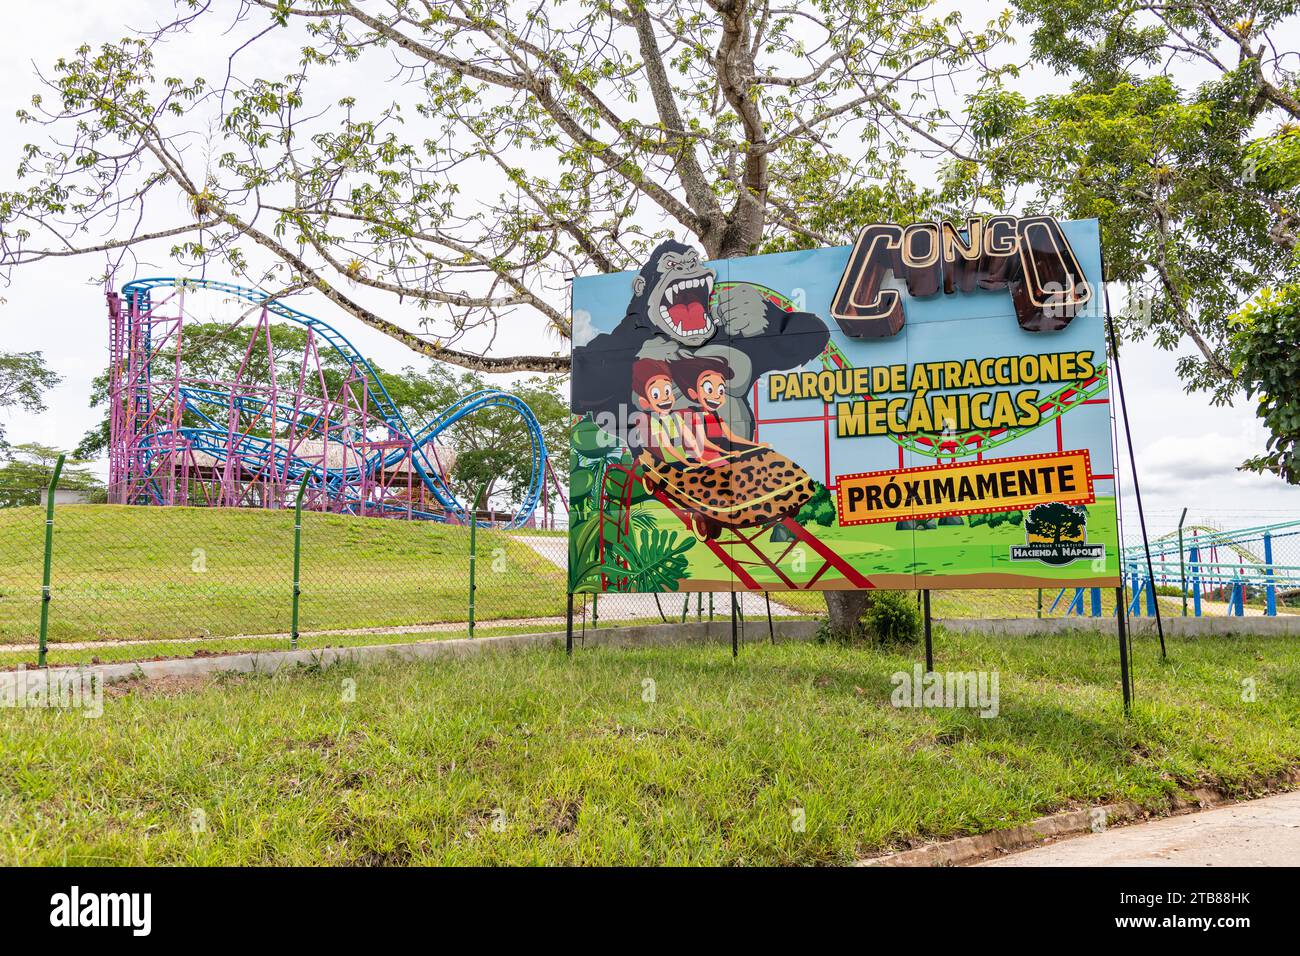 A sign promoting a ride at the Hacienda Napoles theme park in Colombia Stock Photo